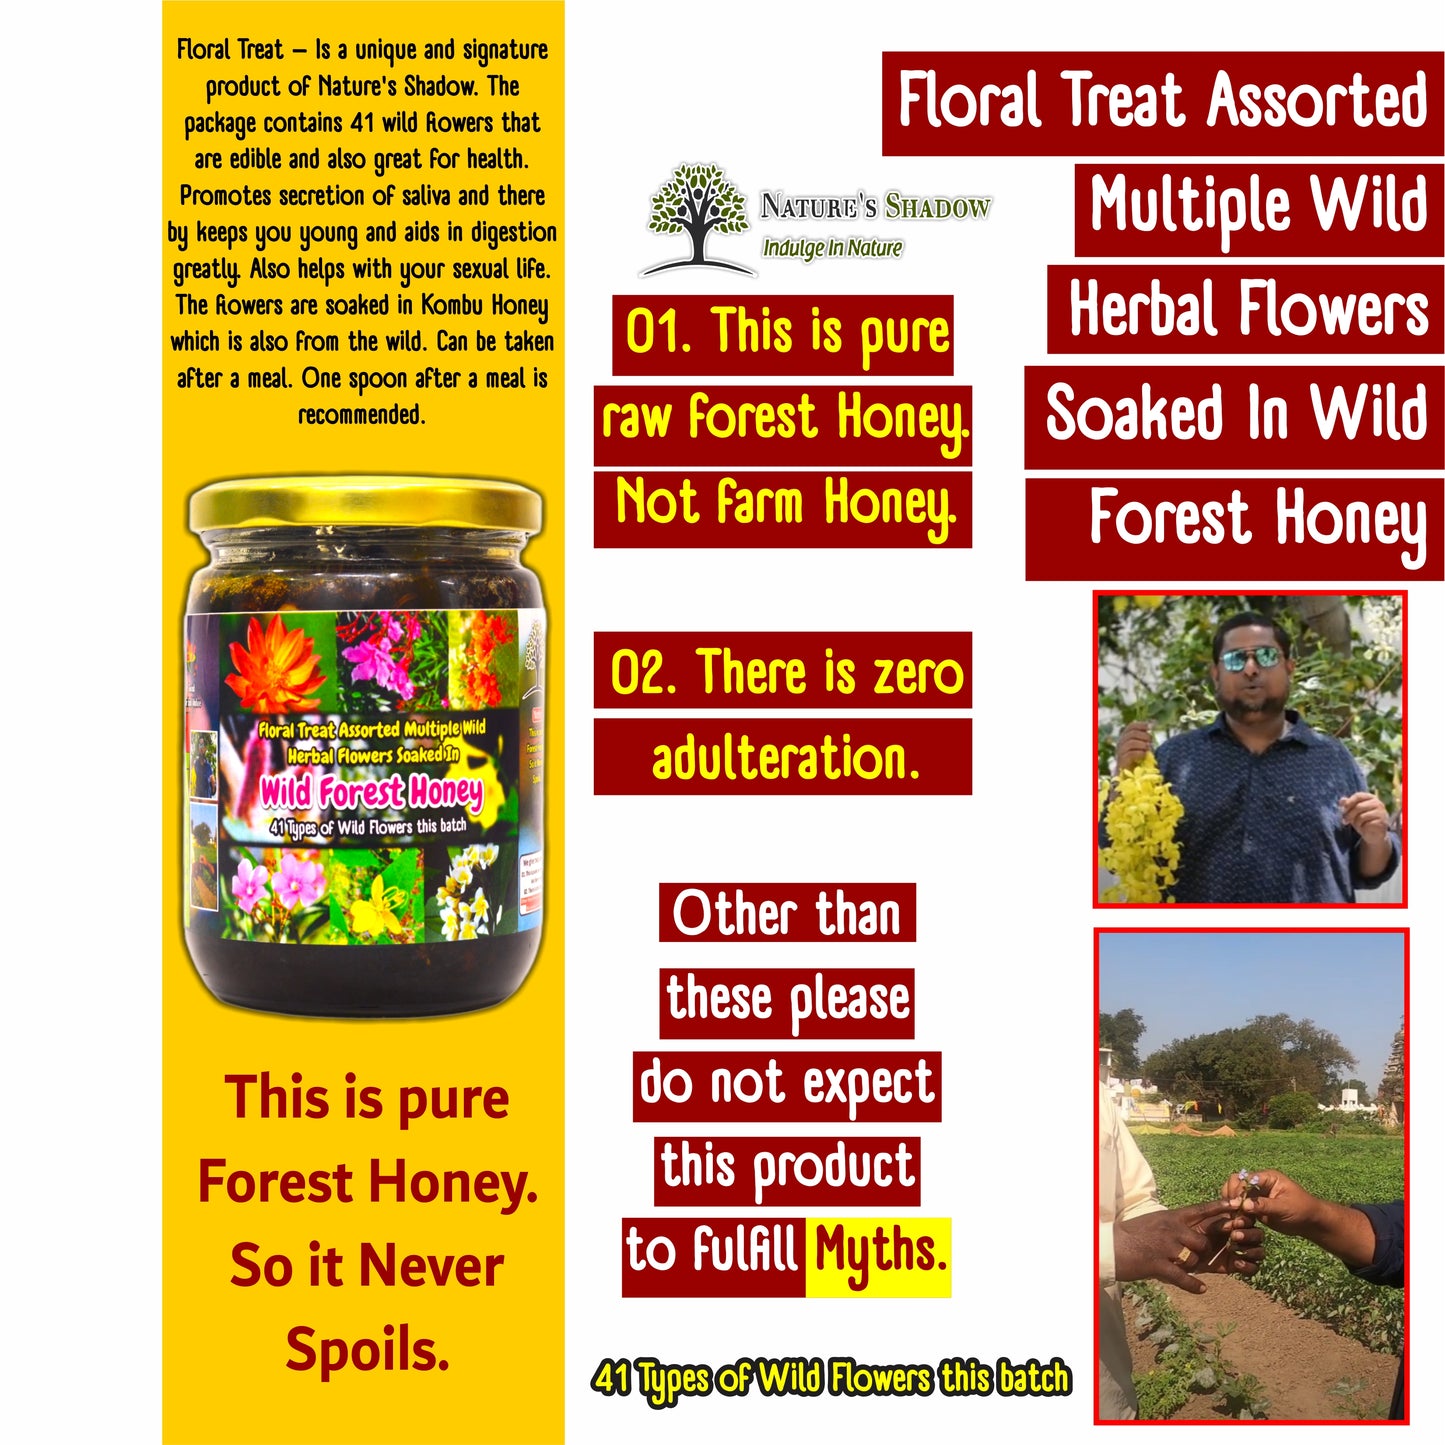 Floral Treat - Assorted Multiple Wild Herbal Flowers Soaked In Wild Forest Honey - 41 Types of Wild Flowers this batch